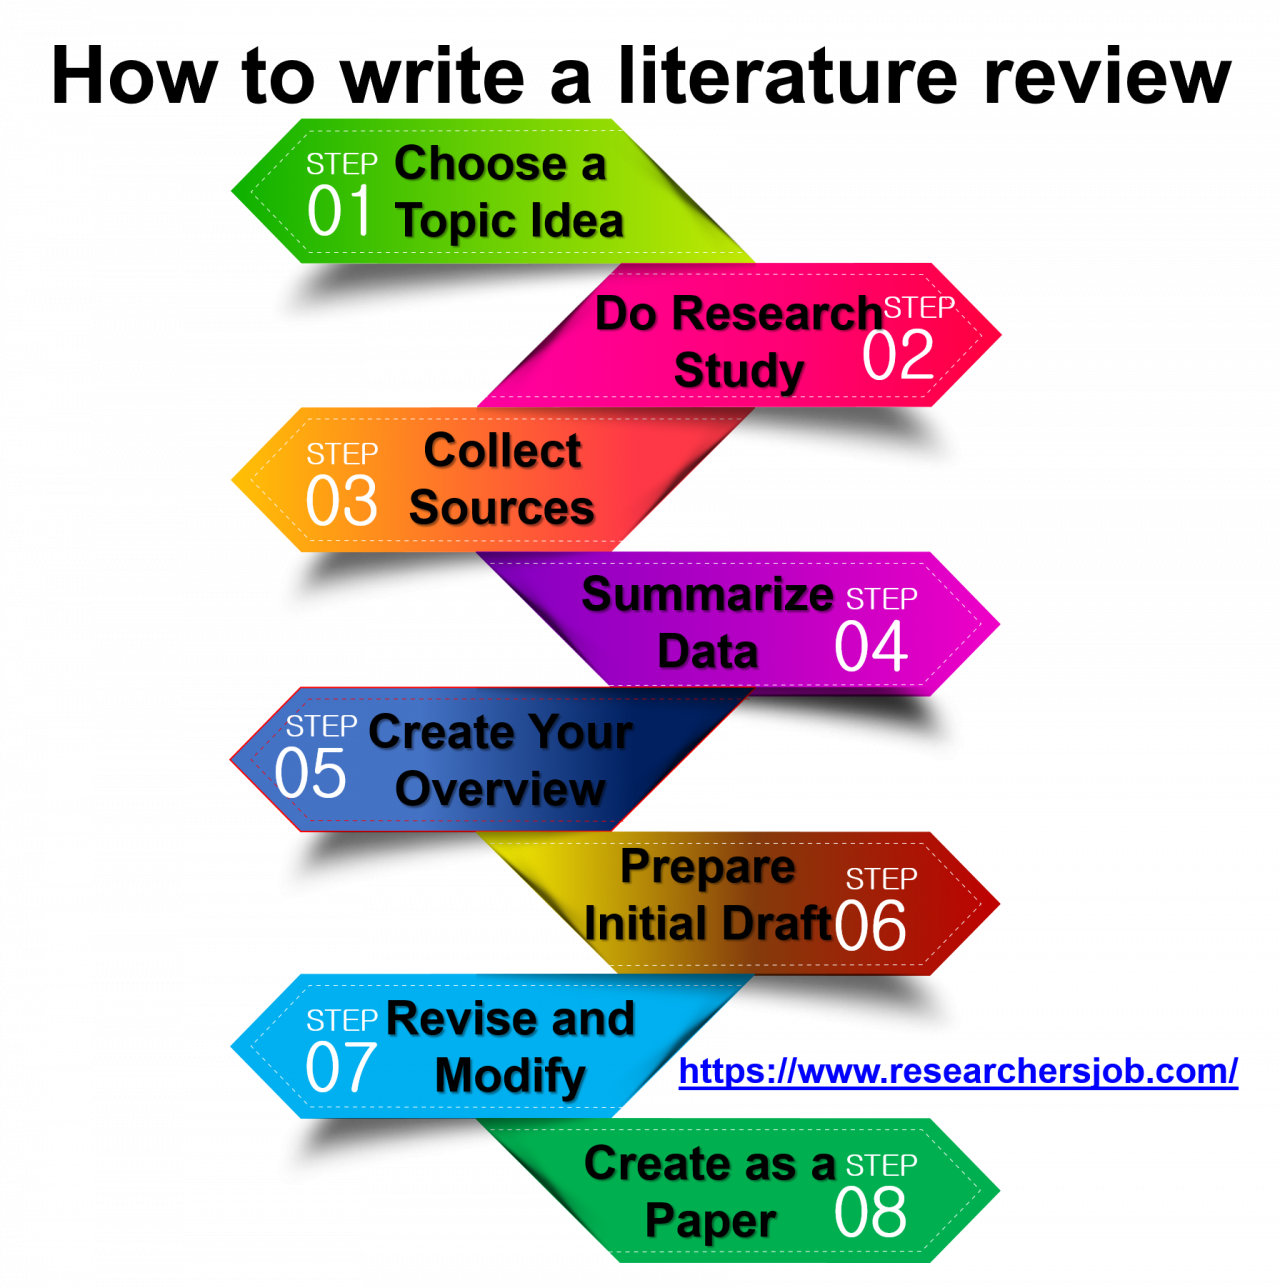 a good literature review covers all topics needed for research